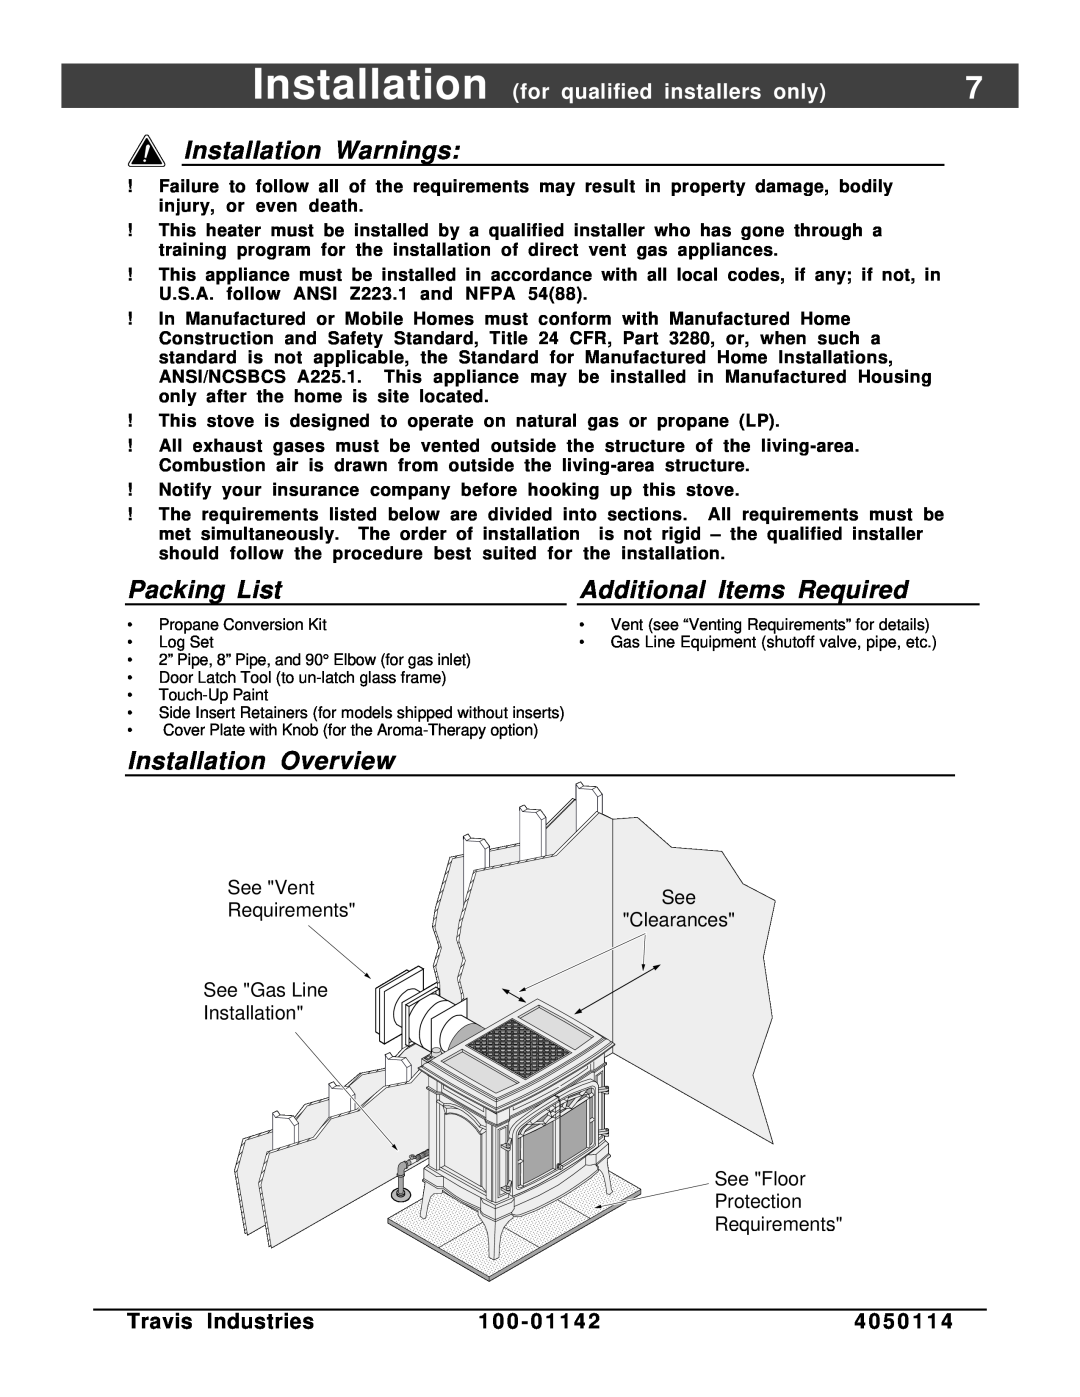 Lopi Direct Vent Freestanding Stove Installation Warnings, Packing List, Additional Items Required, Installation Overview 